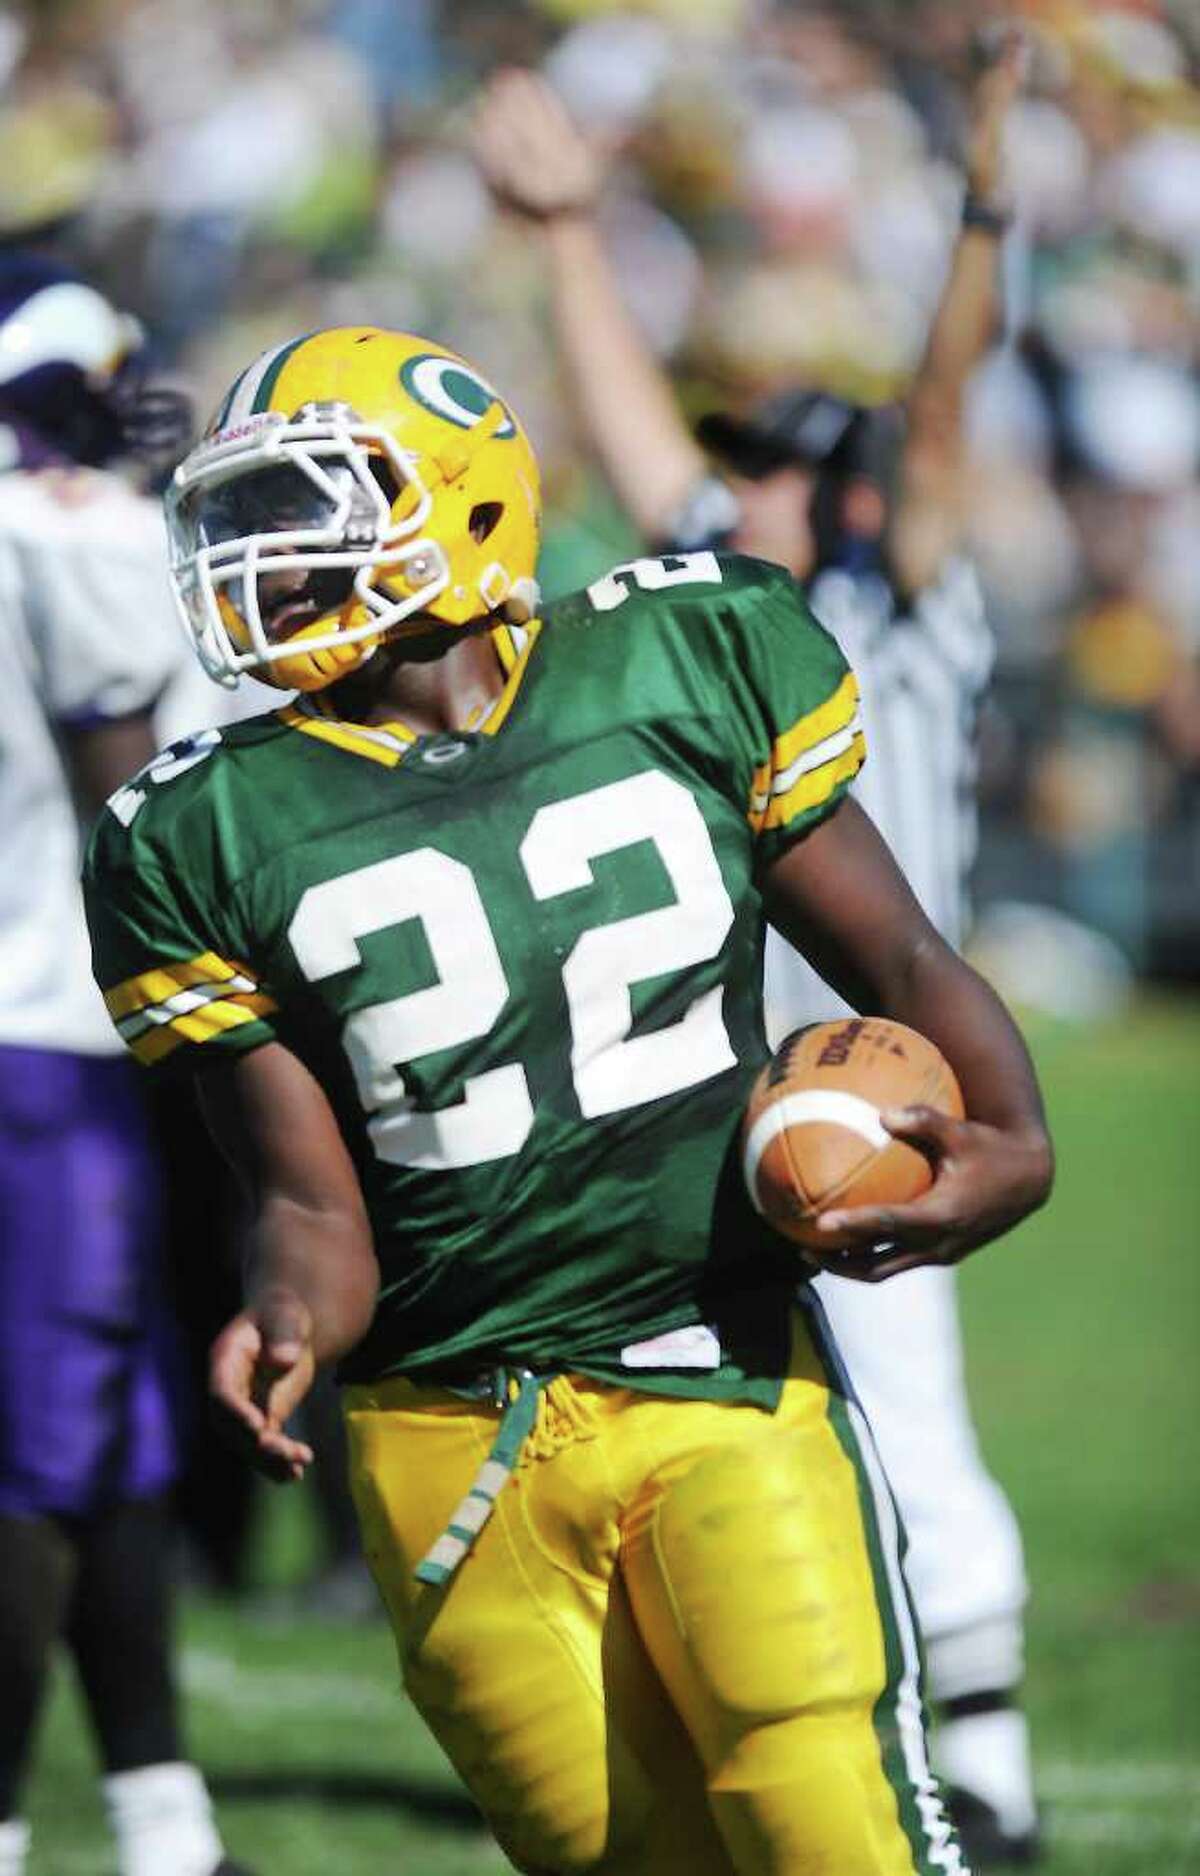 Trinity Catholic High School's Shaquan Howsie scores a touchdown against Westhill High School in city rivalry football action at Trinity in Stamford, Conn. on Saturday October 2, 2010.